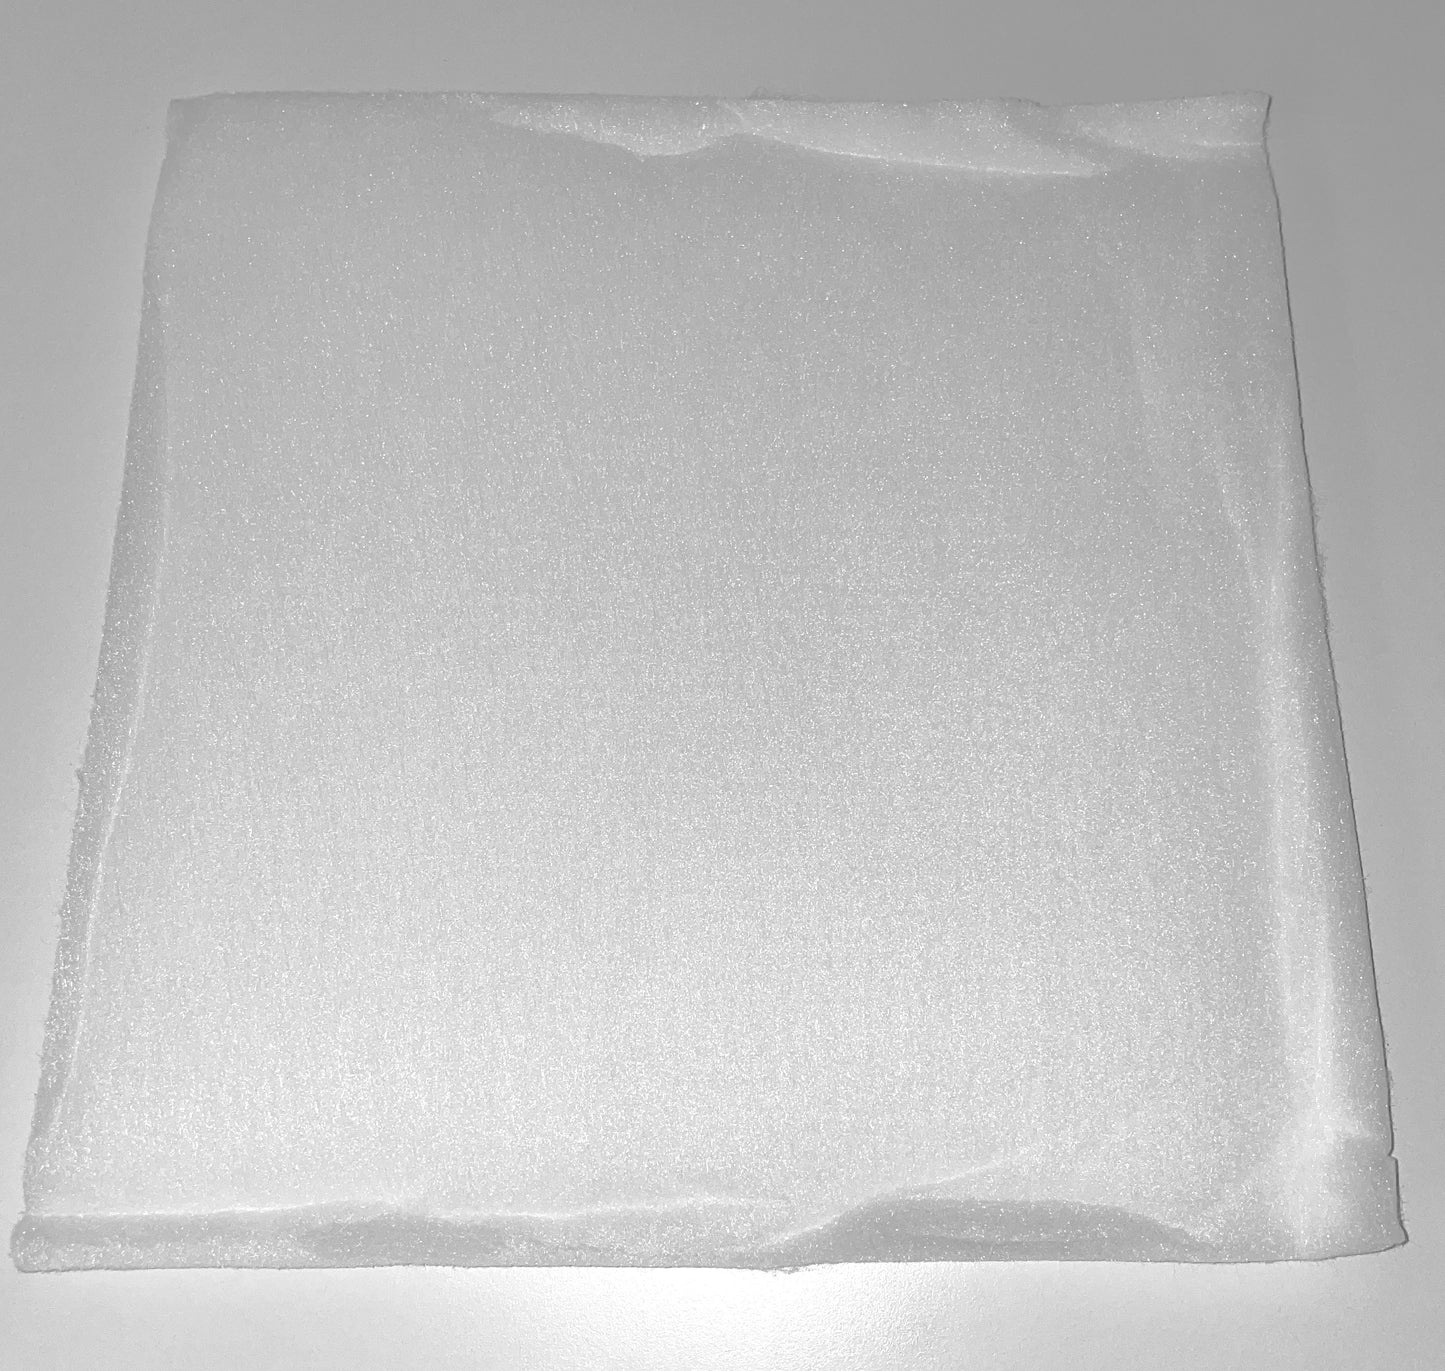 QP008-0009 - Box of 20 Pre-filter pads for BF100/LN230 (DustExtraction)